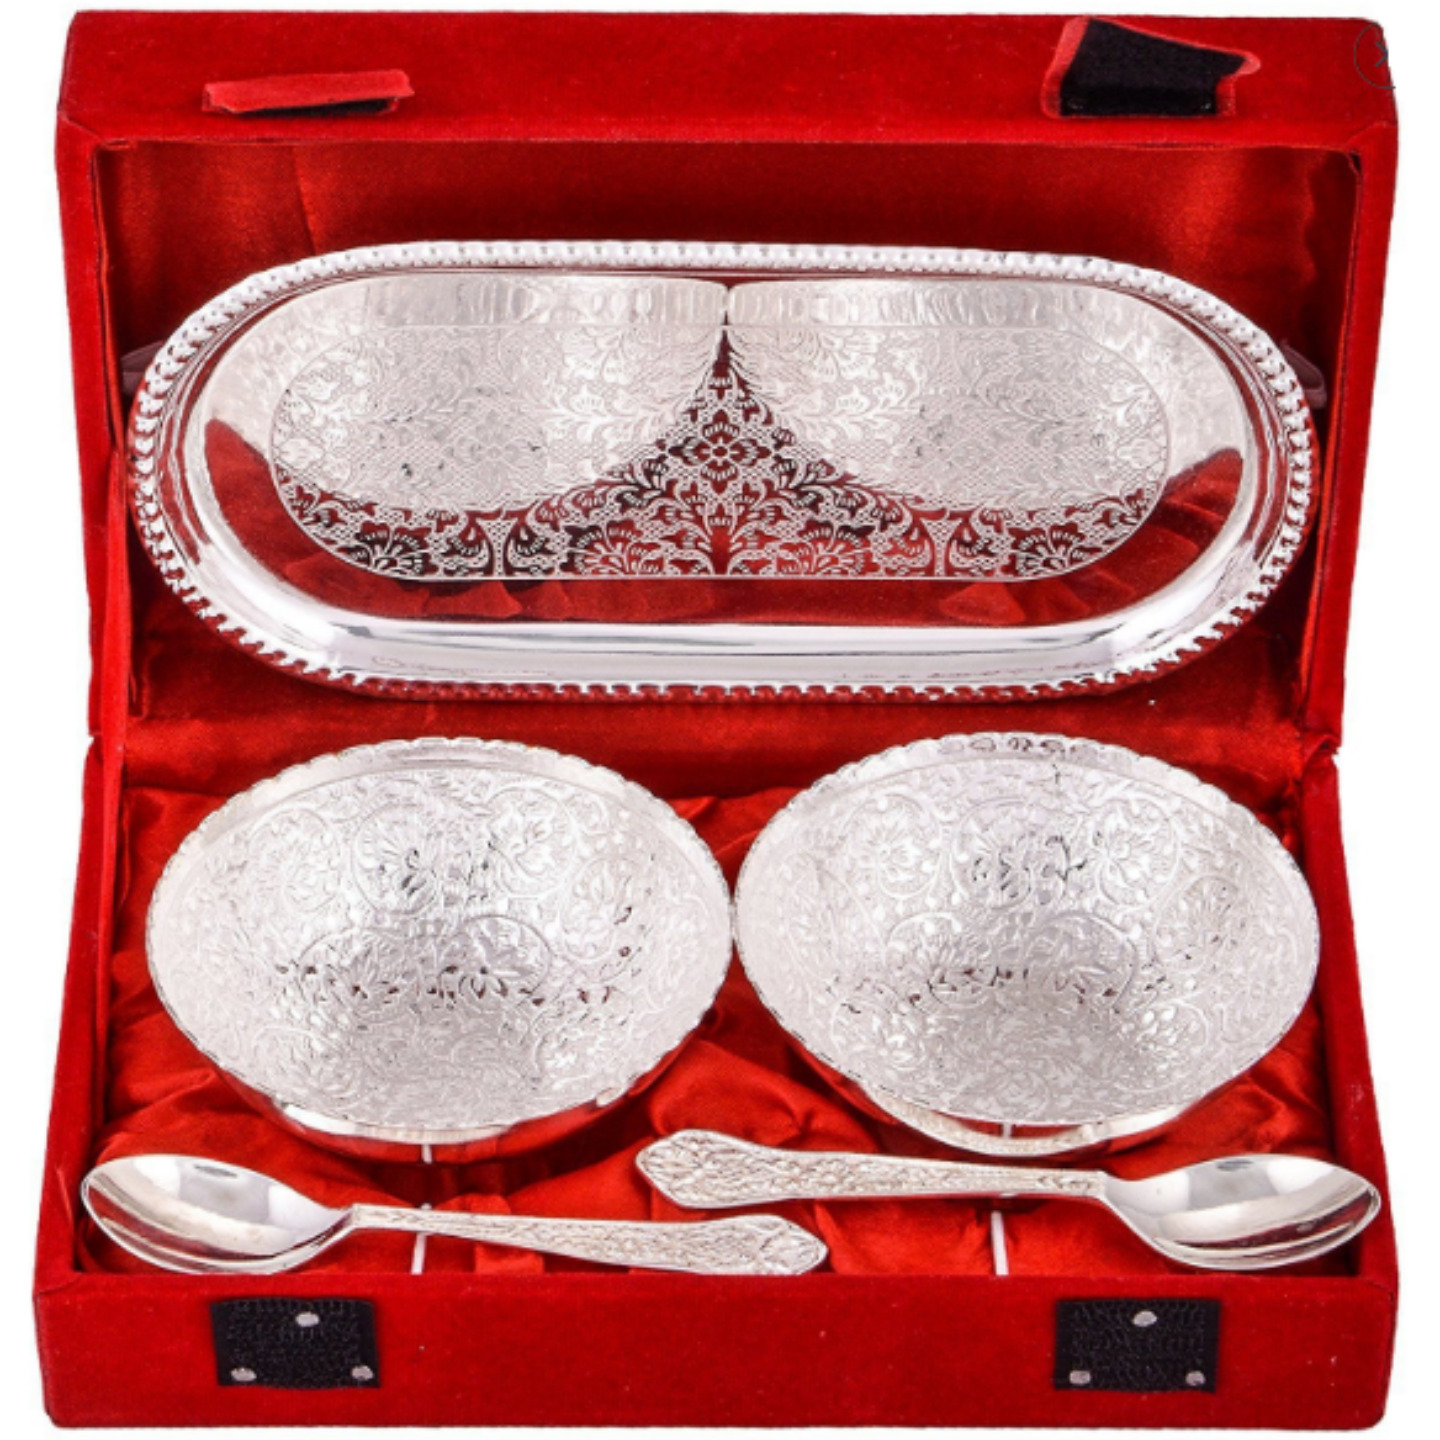 SILVER PLATED 2 FLOWER BOWL SET WITH SPOON AND TRAY